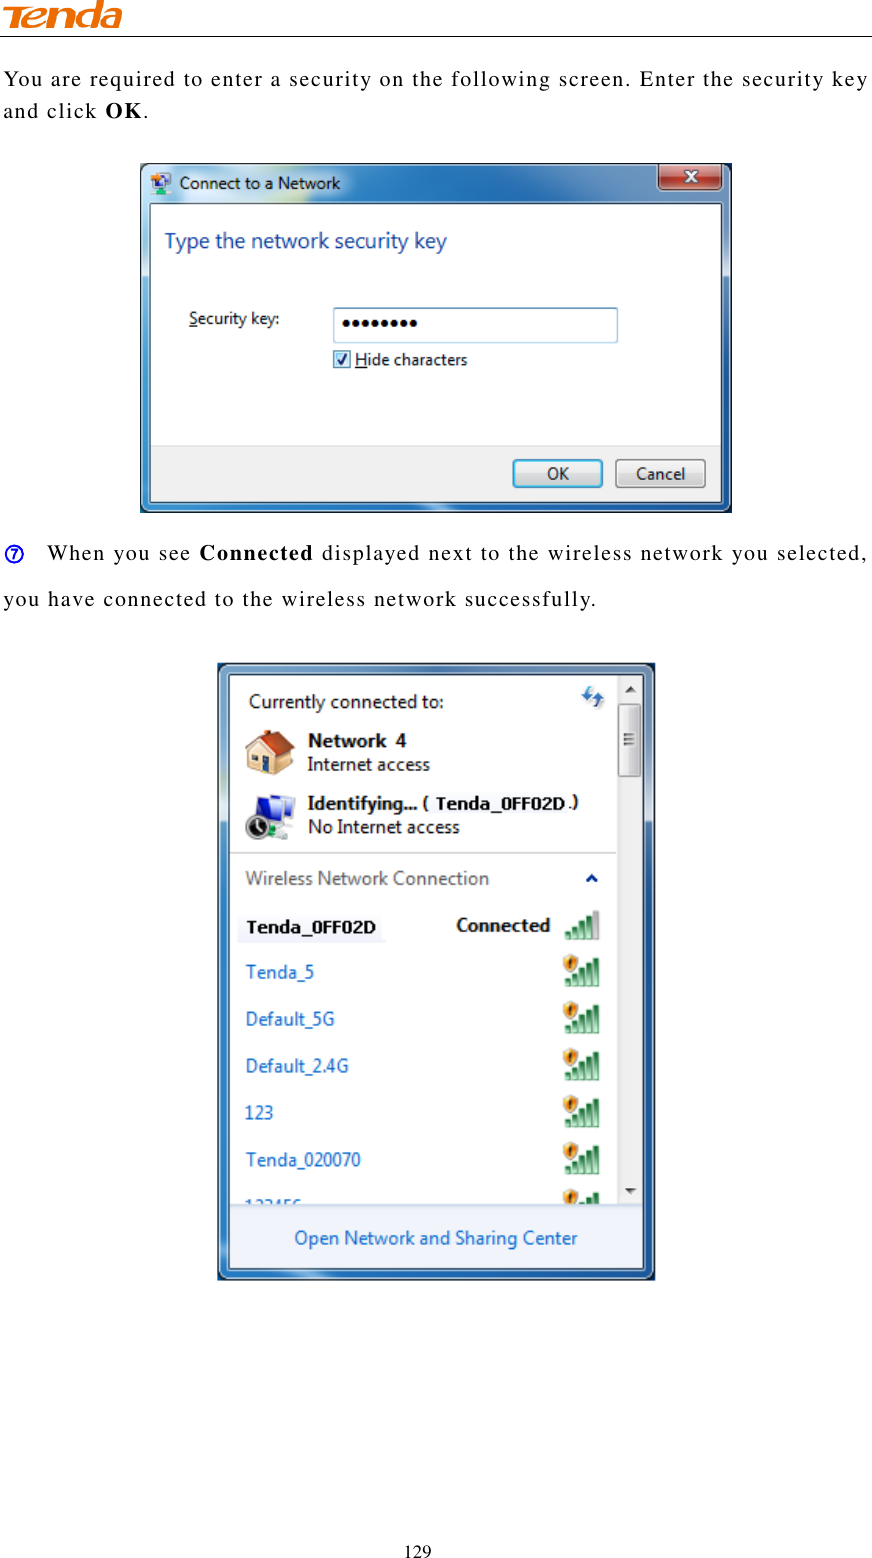                                    129 You are required to enter a security on the following screen. Enter the security key and click OK.   ⑦ When you see Connected displayed next to the wireless network you selected, you have connected to the wireless network successfully.   